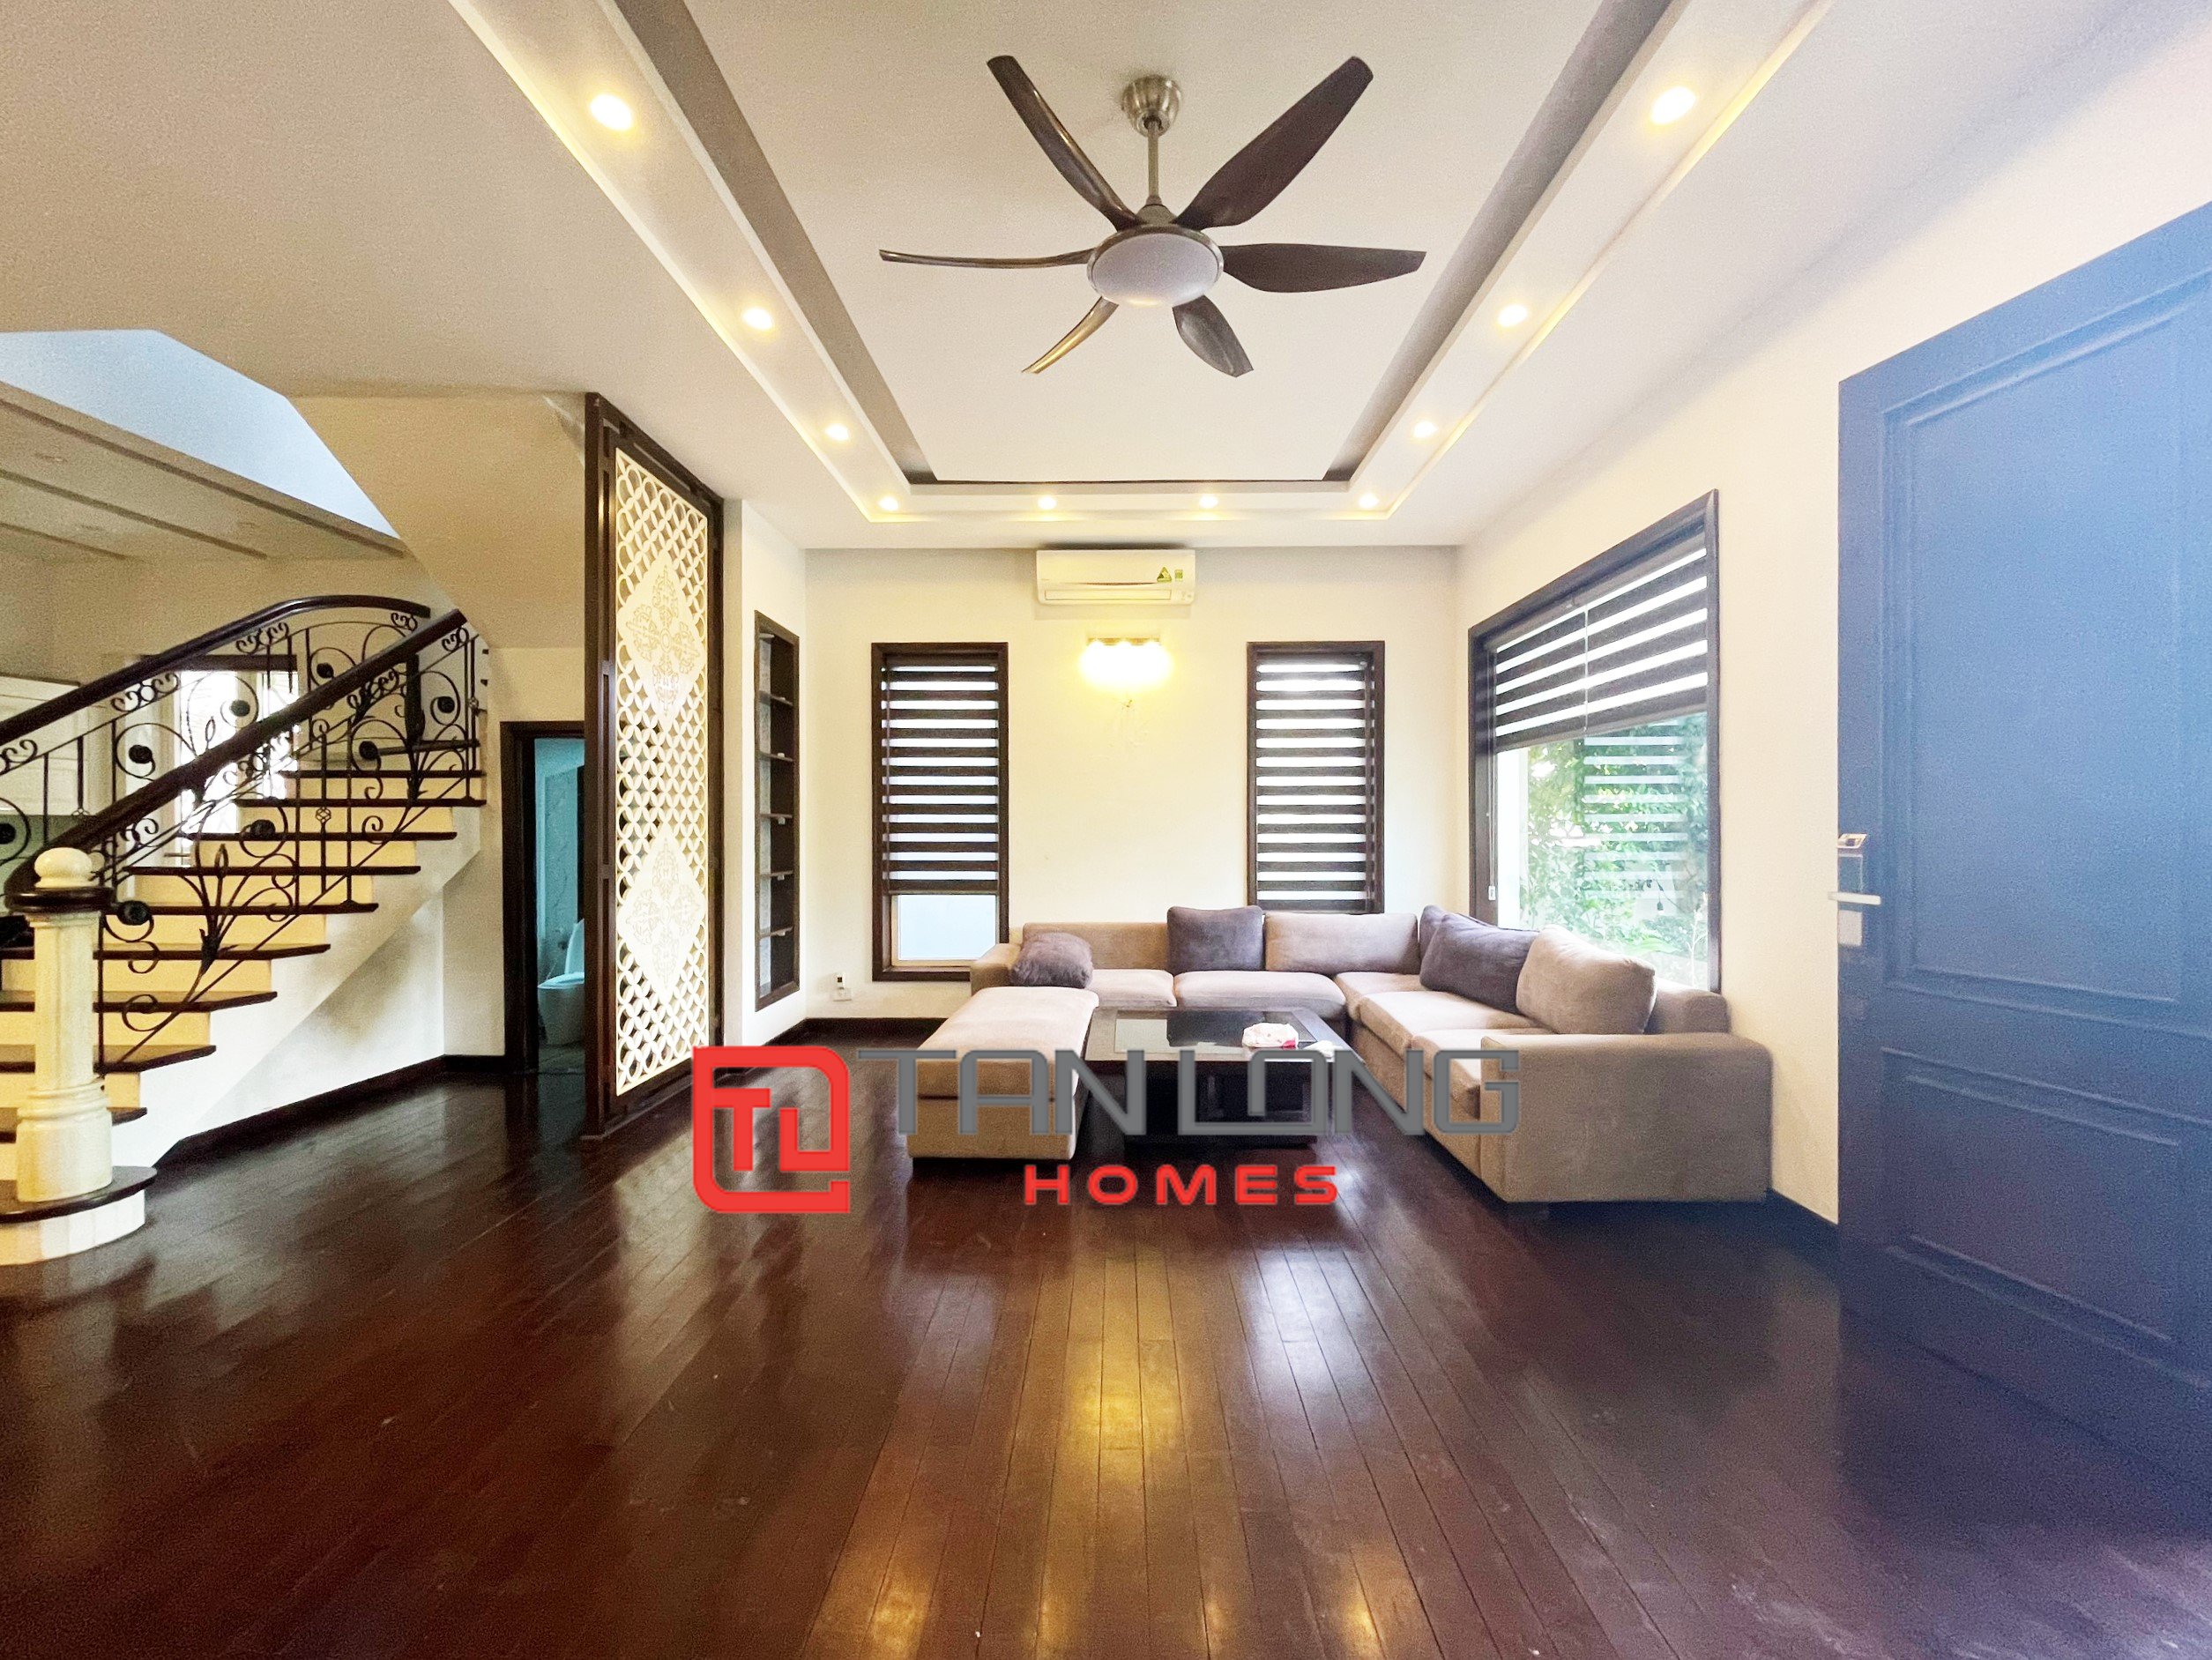 Duplex Villa for rent with full furniture at Vinhomes The Harmony